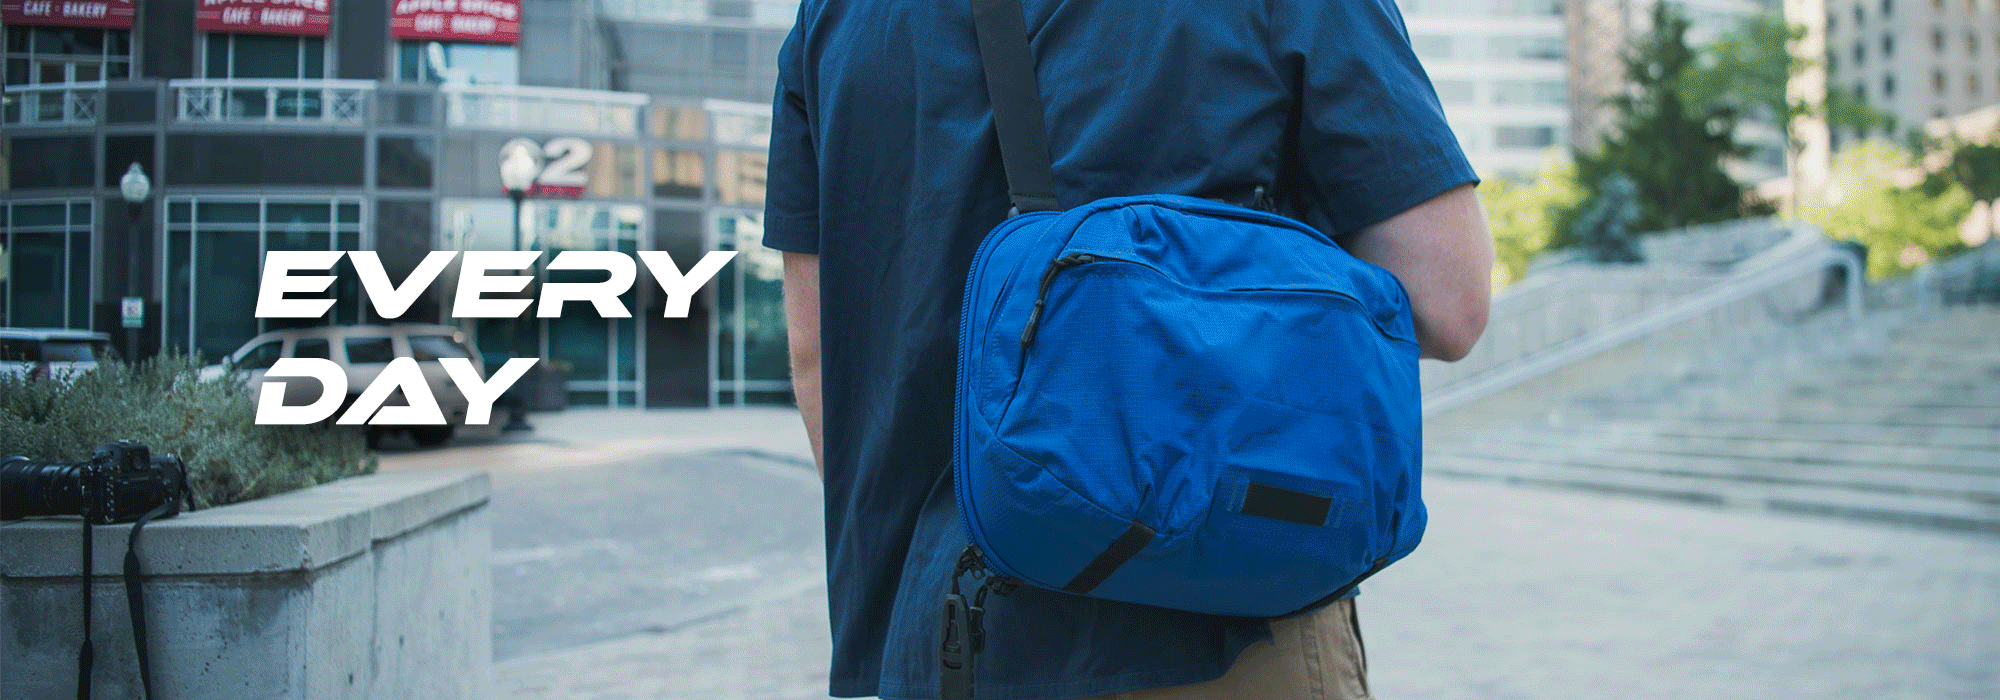 Vertx Next Generation Bags and Packs